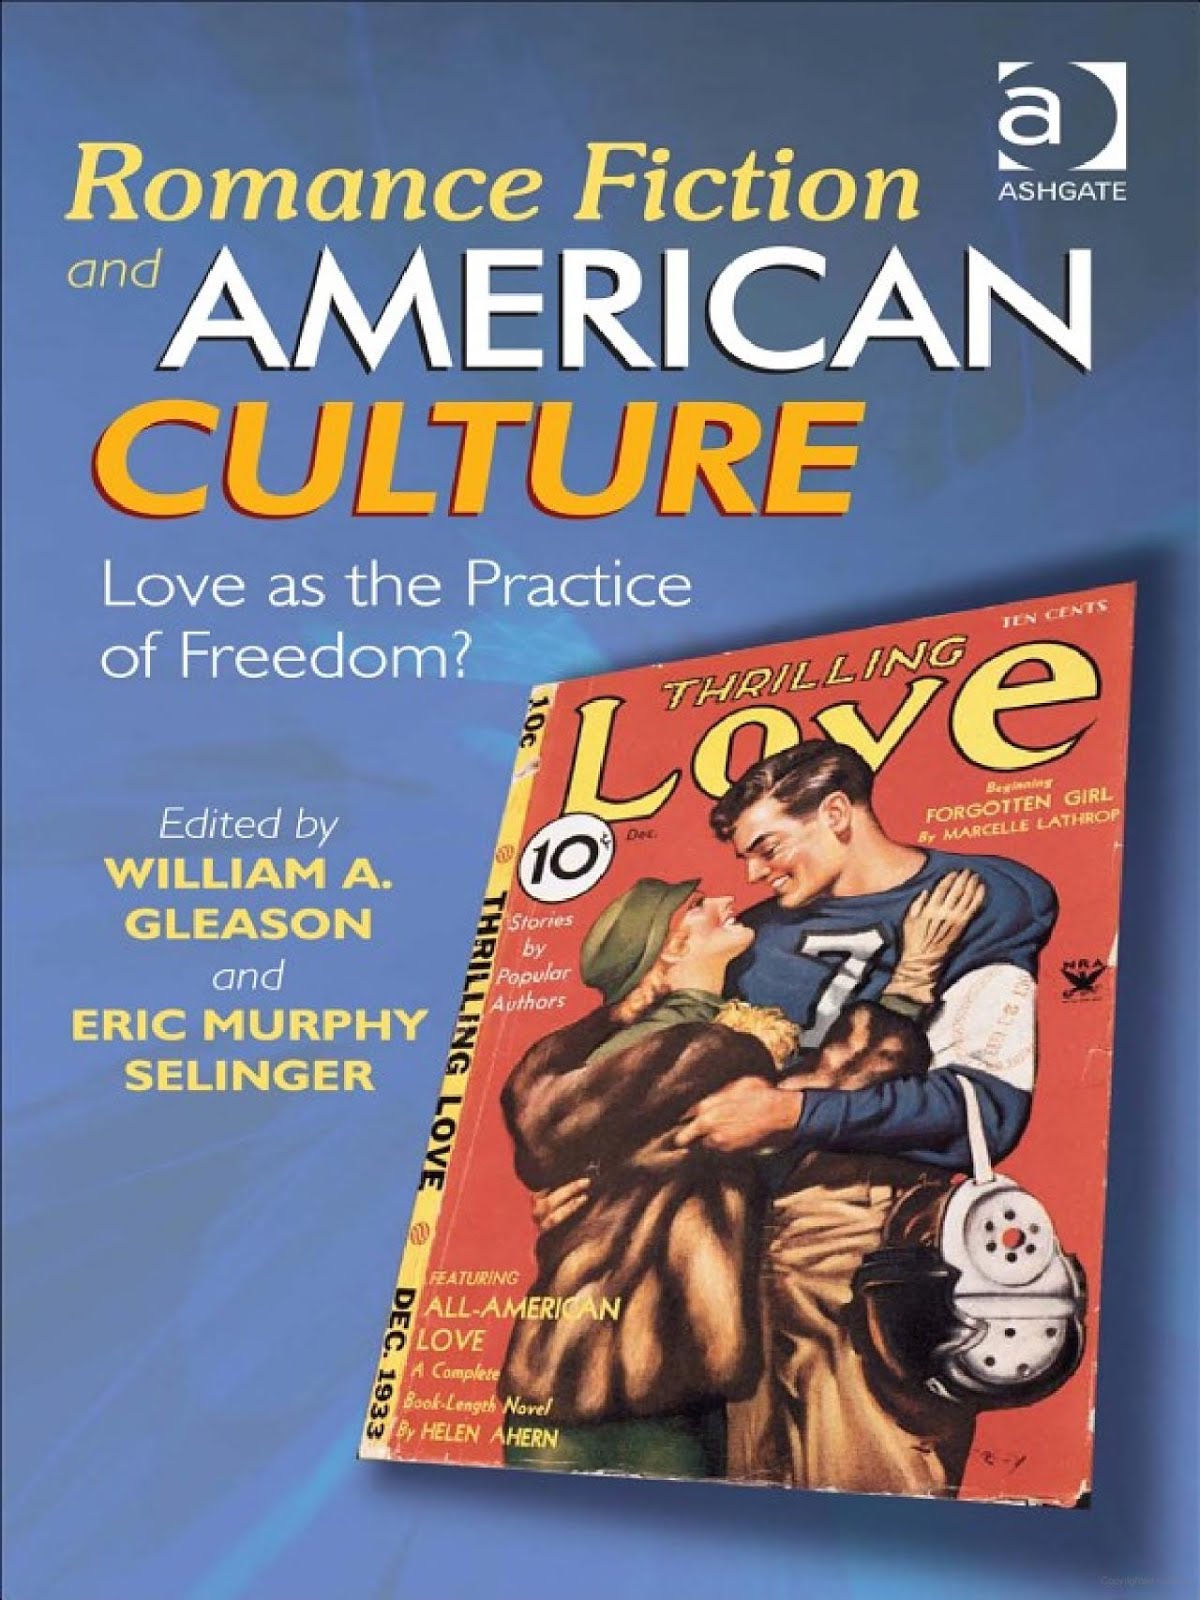 Romance Fiction and American Culture: Love as the Practice of Freedom?